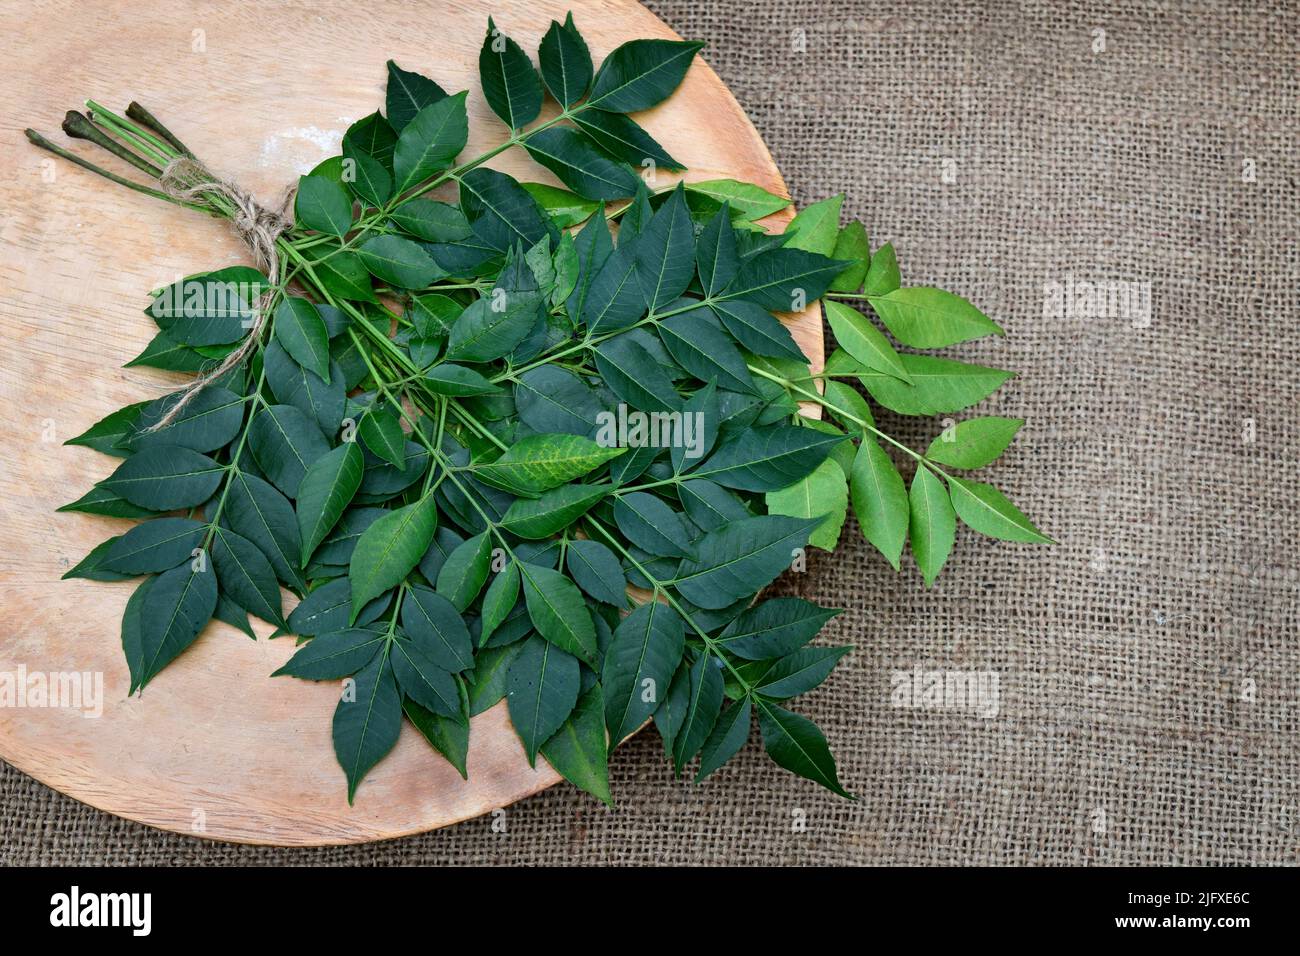 Medicinal neem leaves on wooden background. Lot of Neem leaf on wood backdrop. Neem use as raw material in homeopathy, and ayurvedic medicinal herb. Stock Photo